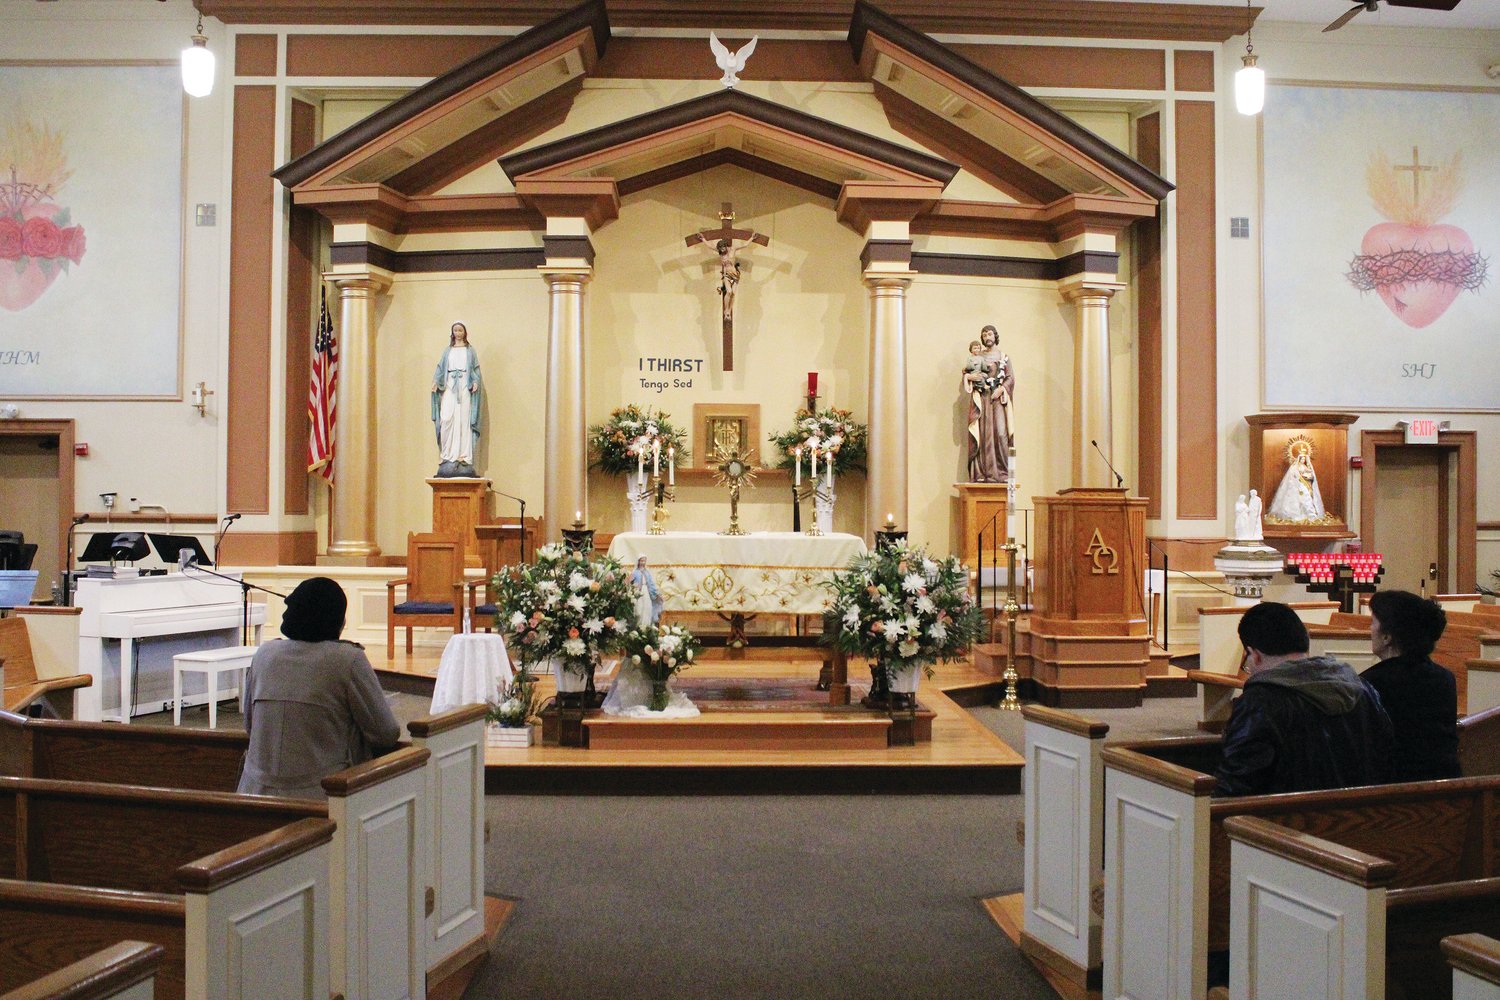 From October 1- 7, the Diocese of Providence hosted the Traveling Rosary Congress, a weeklong period of intense, around the clock prayer consisting of Perpetual Adoration and hourly Rosary, offered in a spirit of reparation. Many came together in Rhode Island, including at St. Patrick Church, Providence, above, and across the U.S. to pray for the healing of our Church, our families, and our nation.